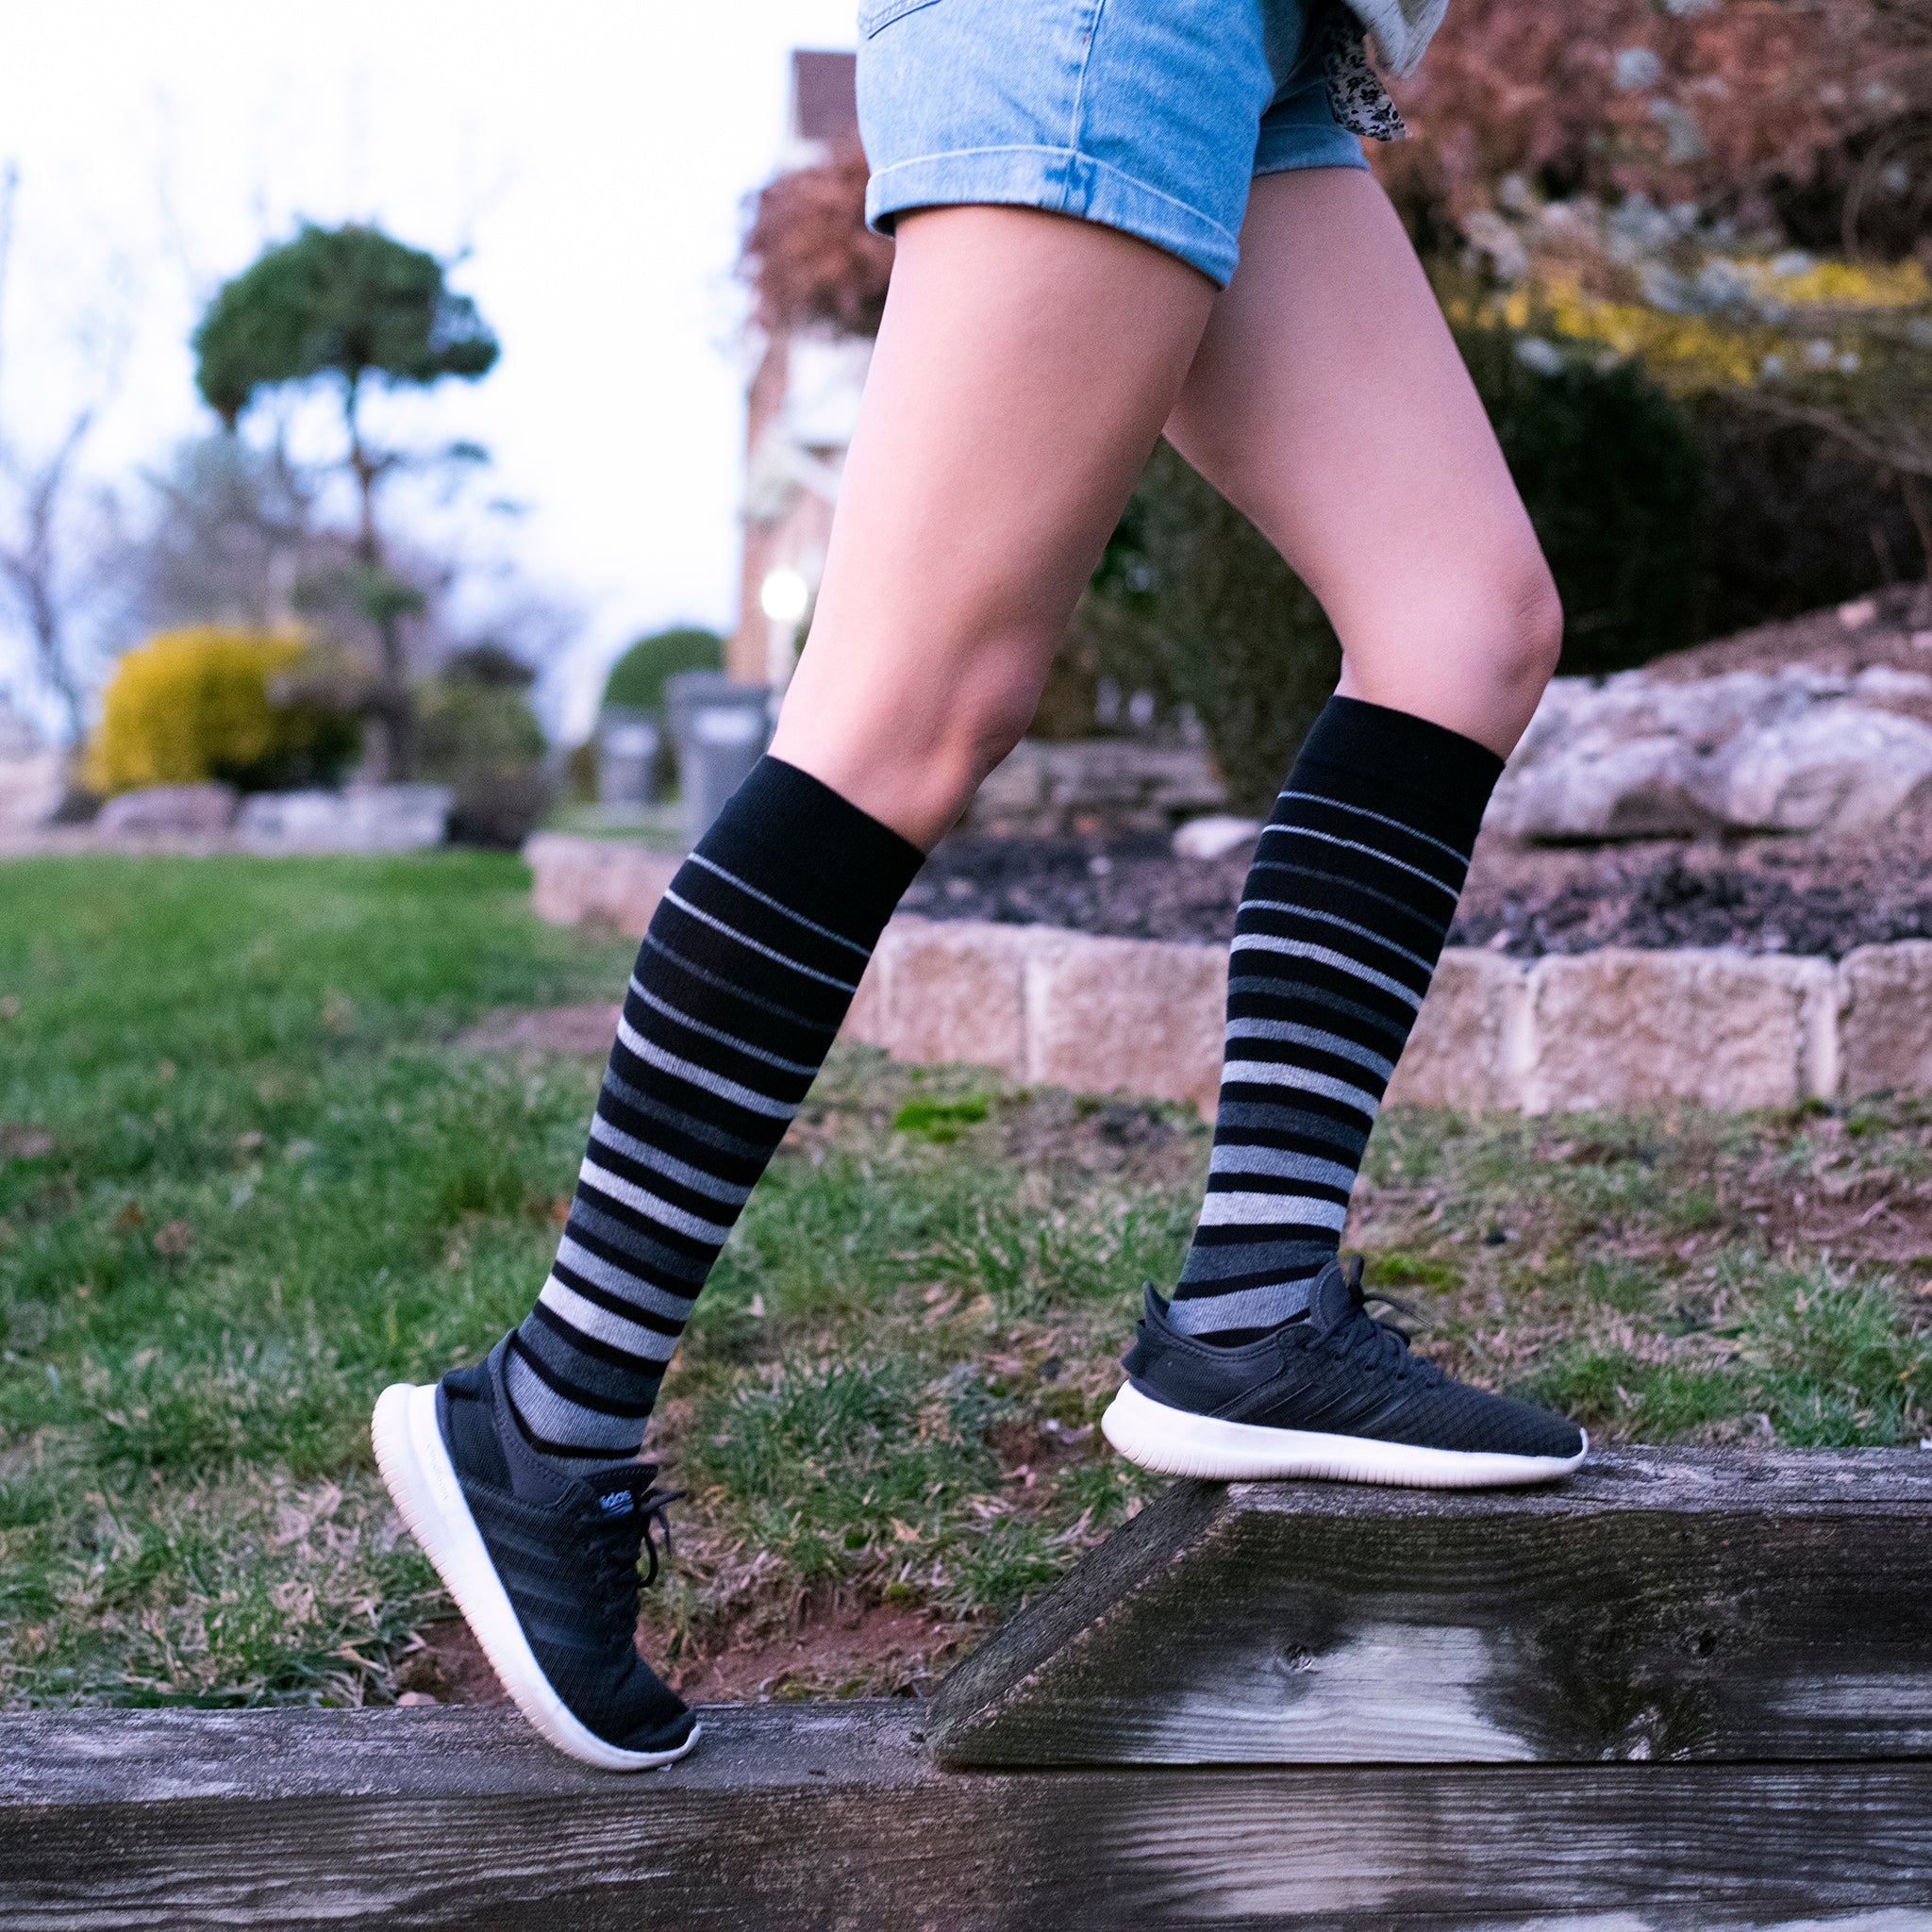 What Compression Socks Should You Wear for Summer?